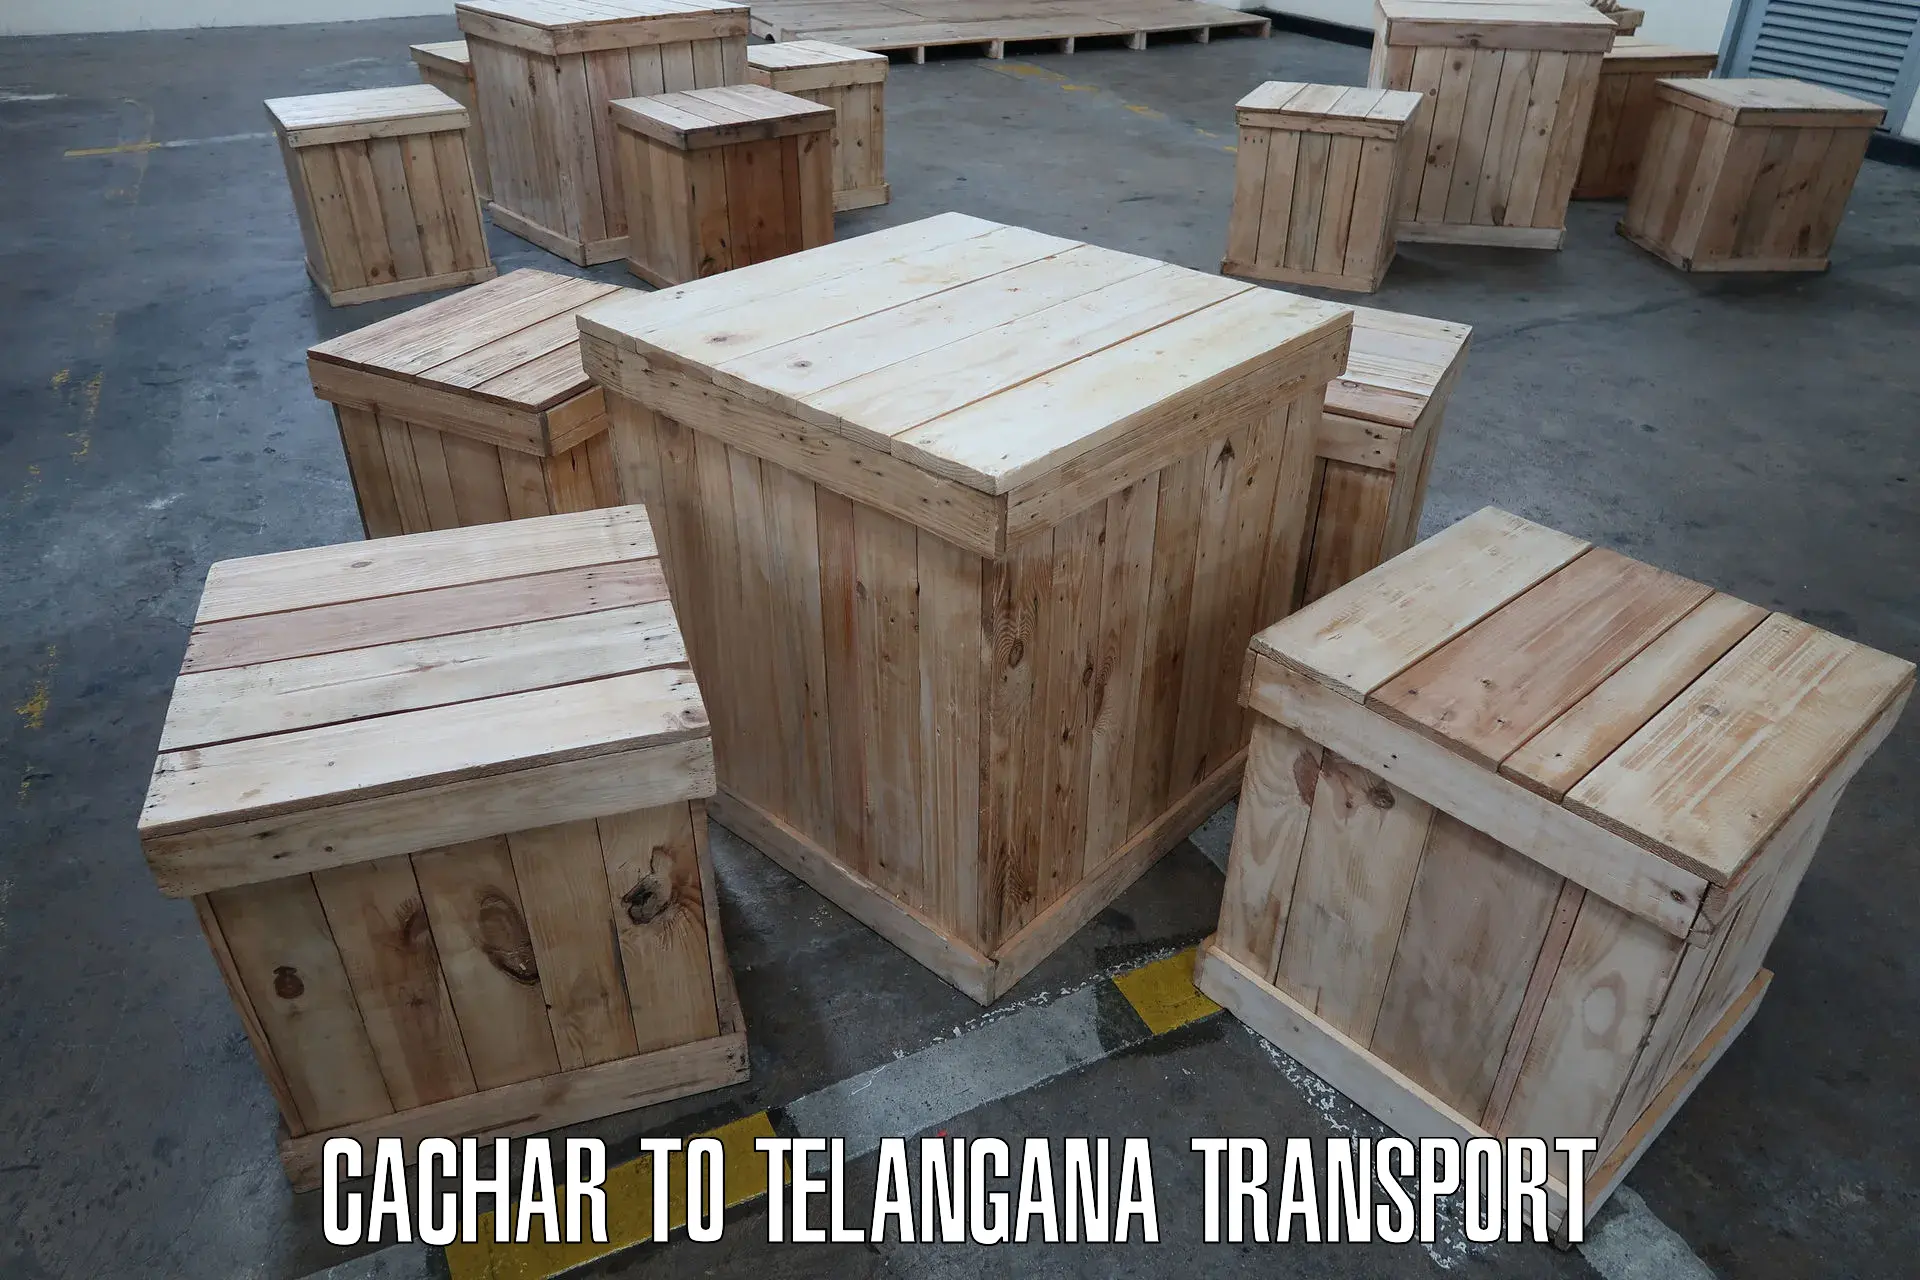 Container transportation services in Cachar to Kothagudem